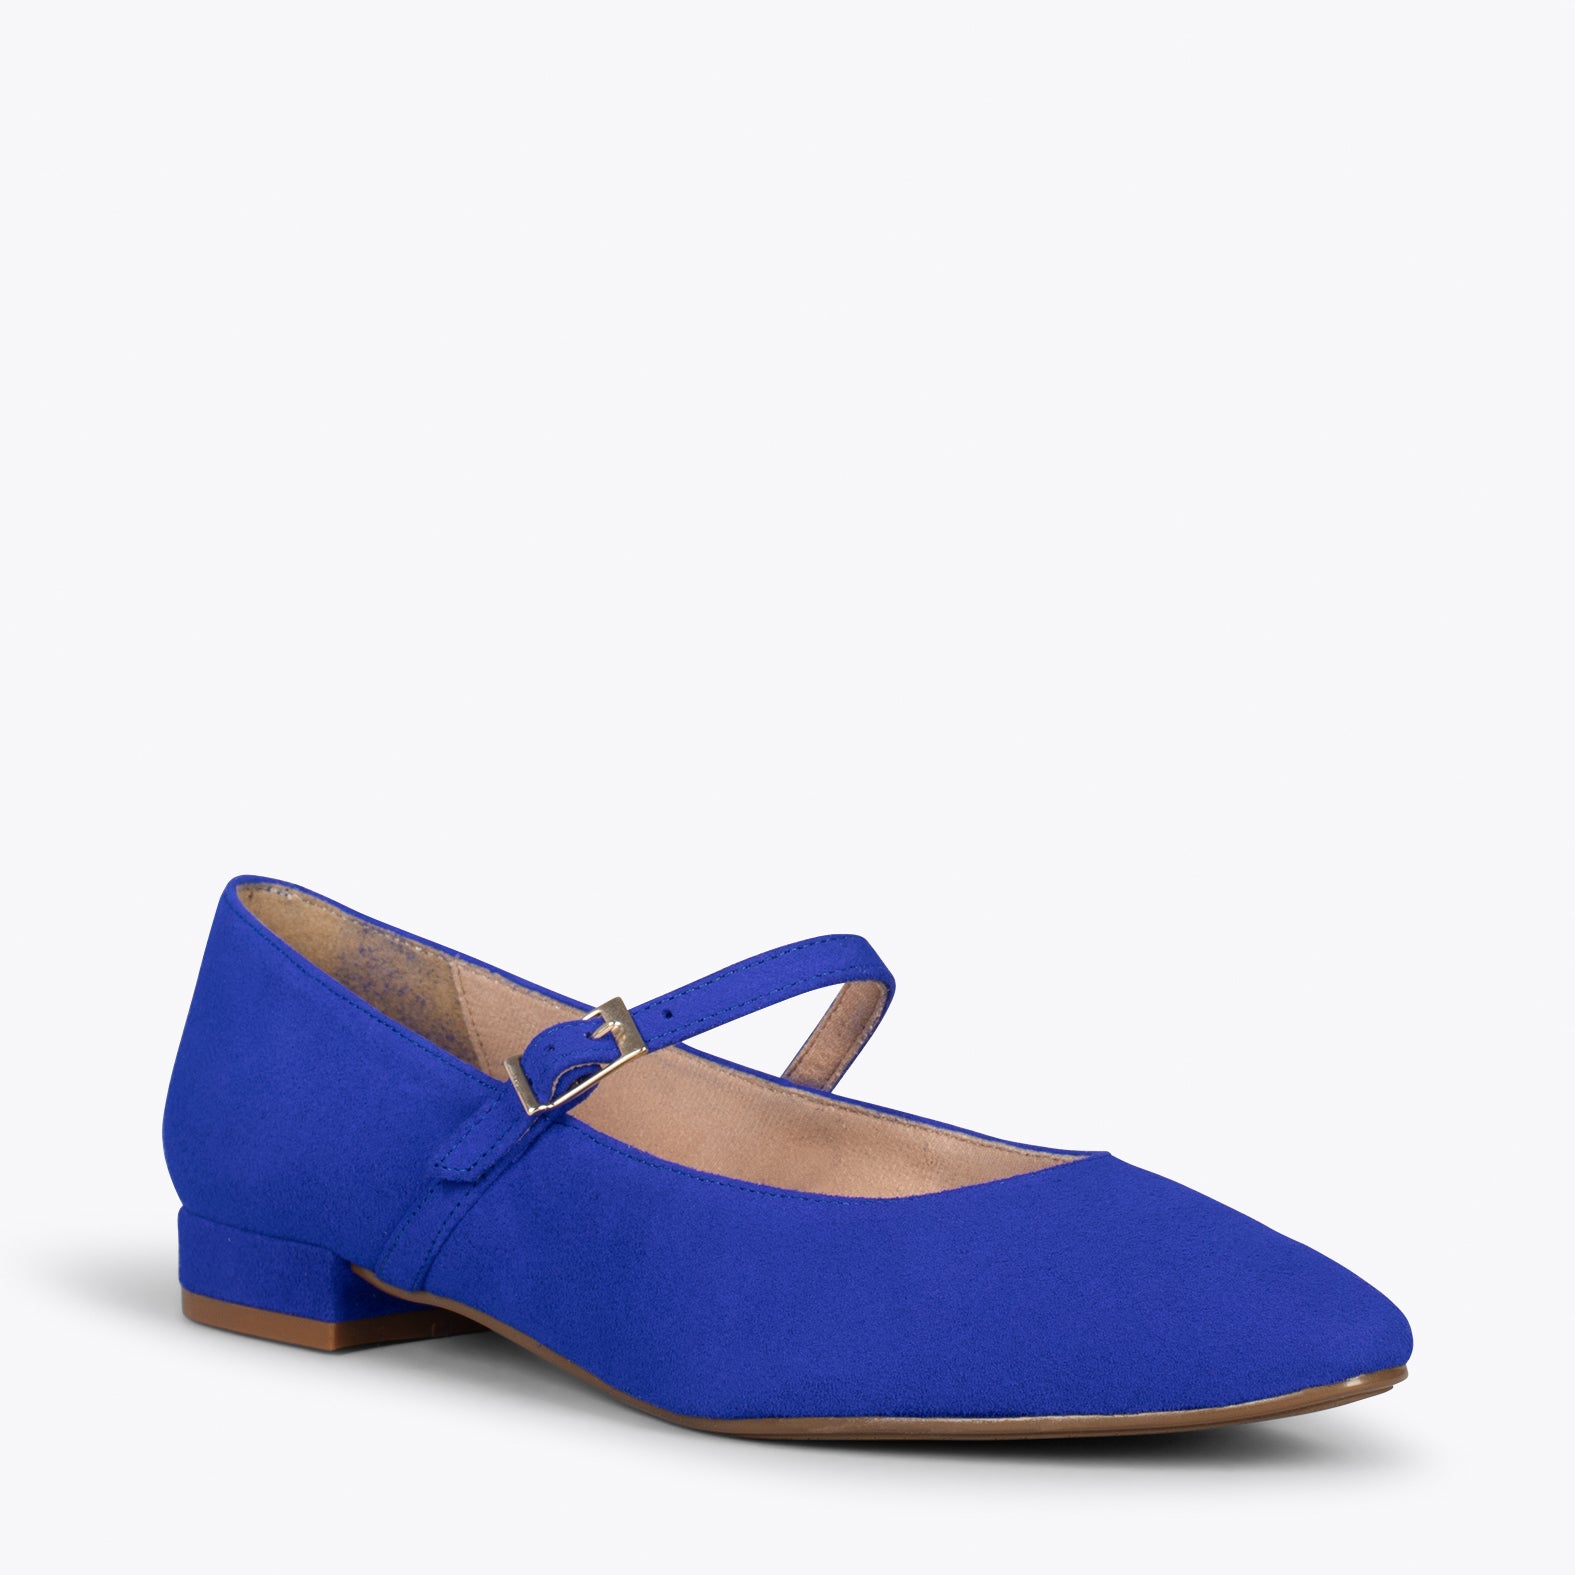 MARY-JANE – ELECTRIC BLUE buckled leather flats